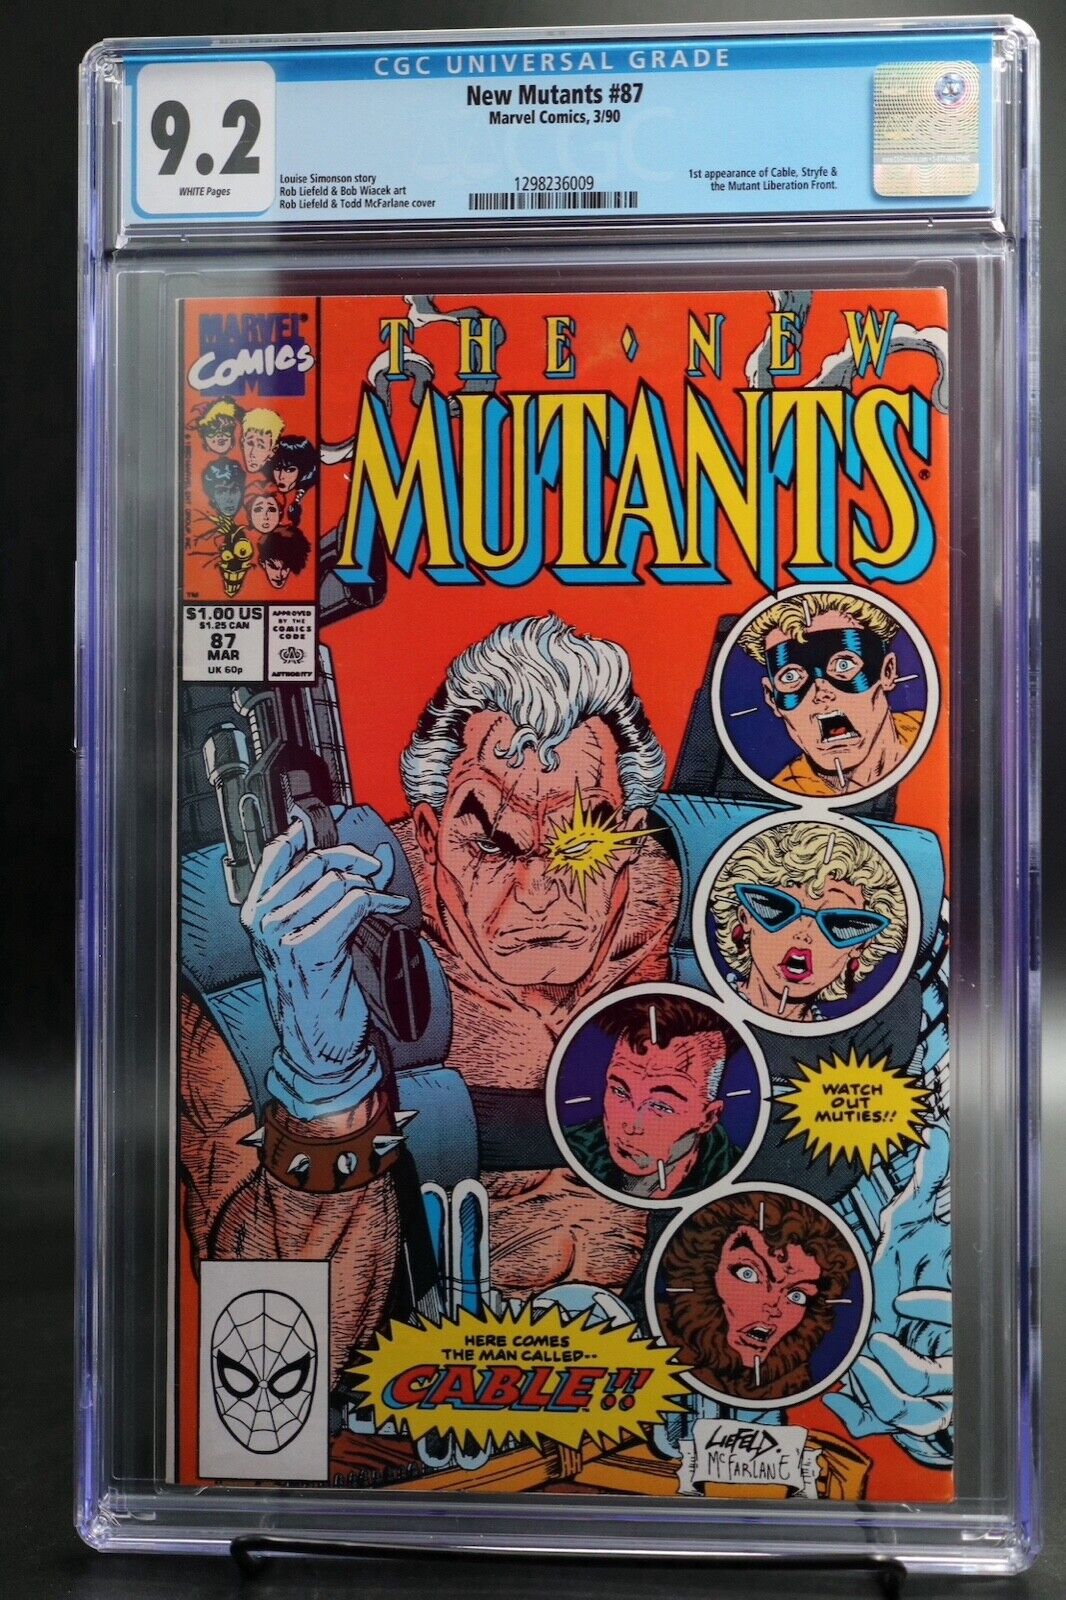 The New Mutants #87 Cgc 9.2 1st App Of Cable, Stryfe N Mutant Liberation Front.